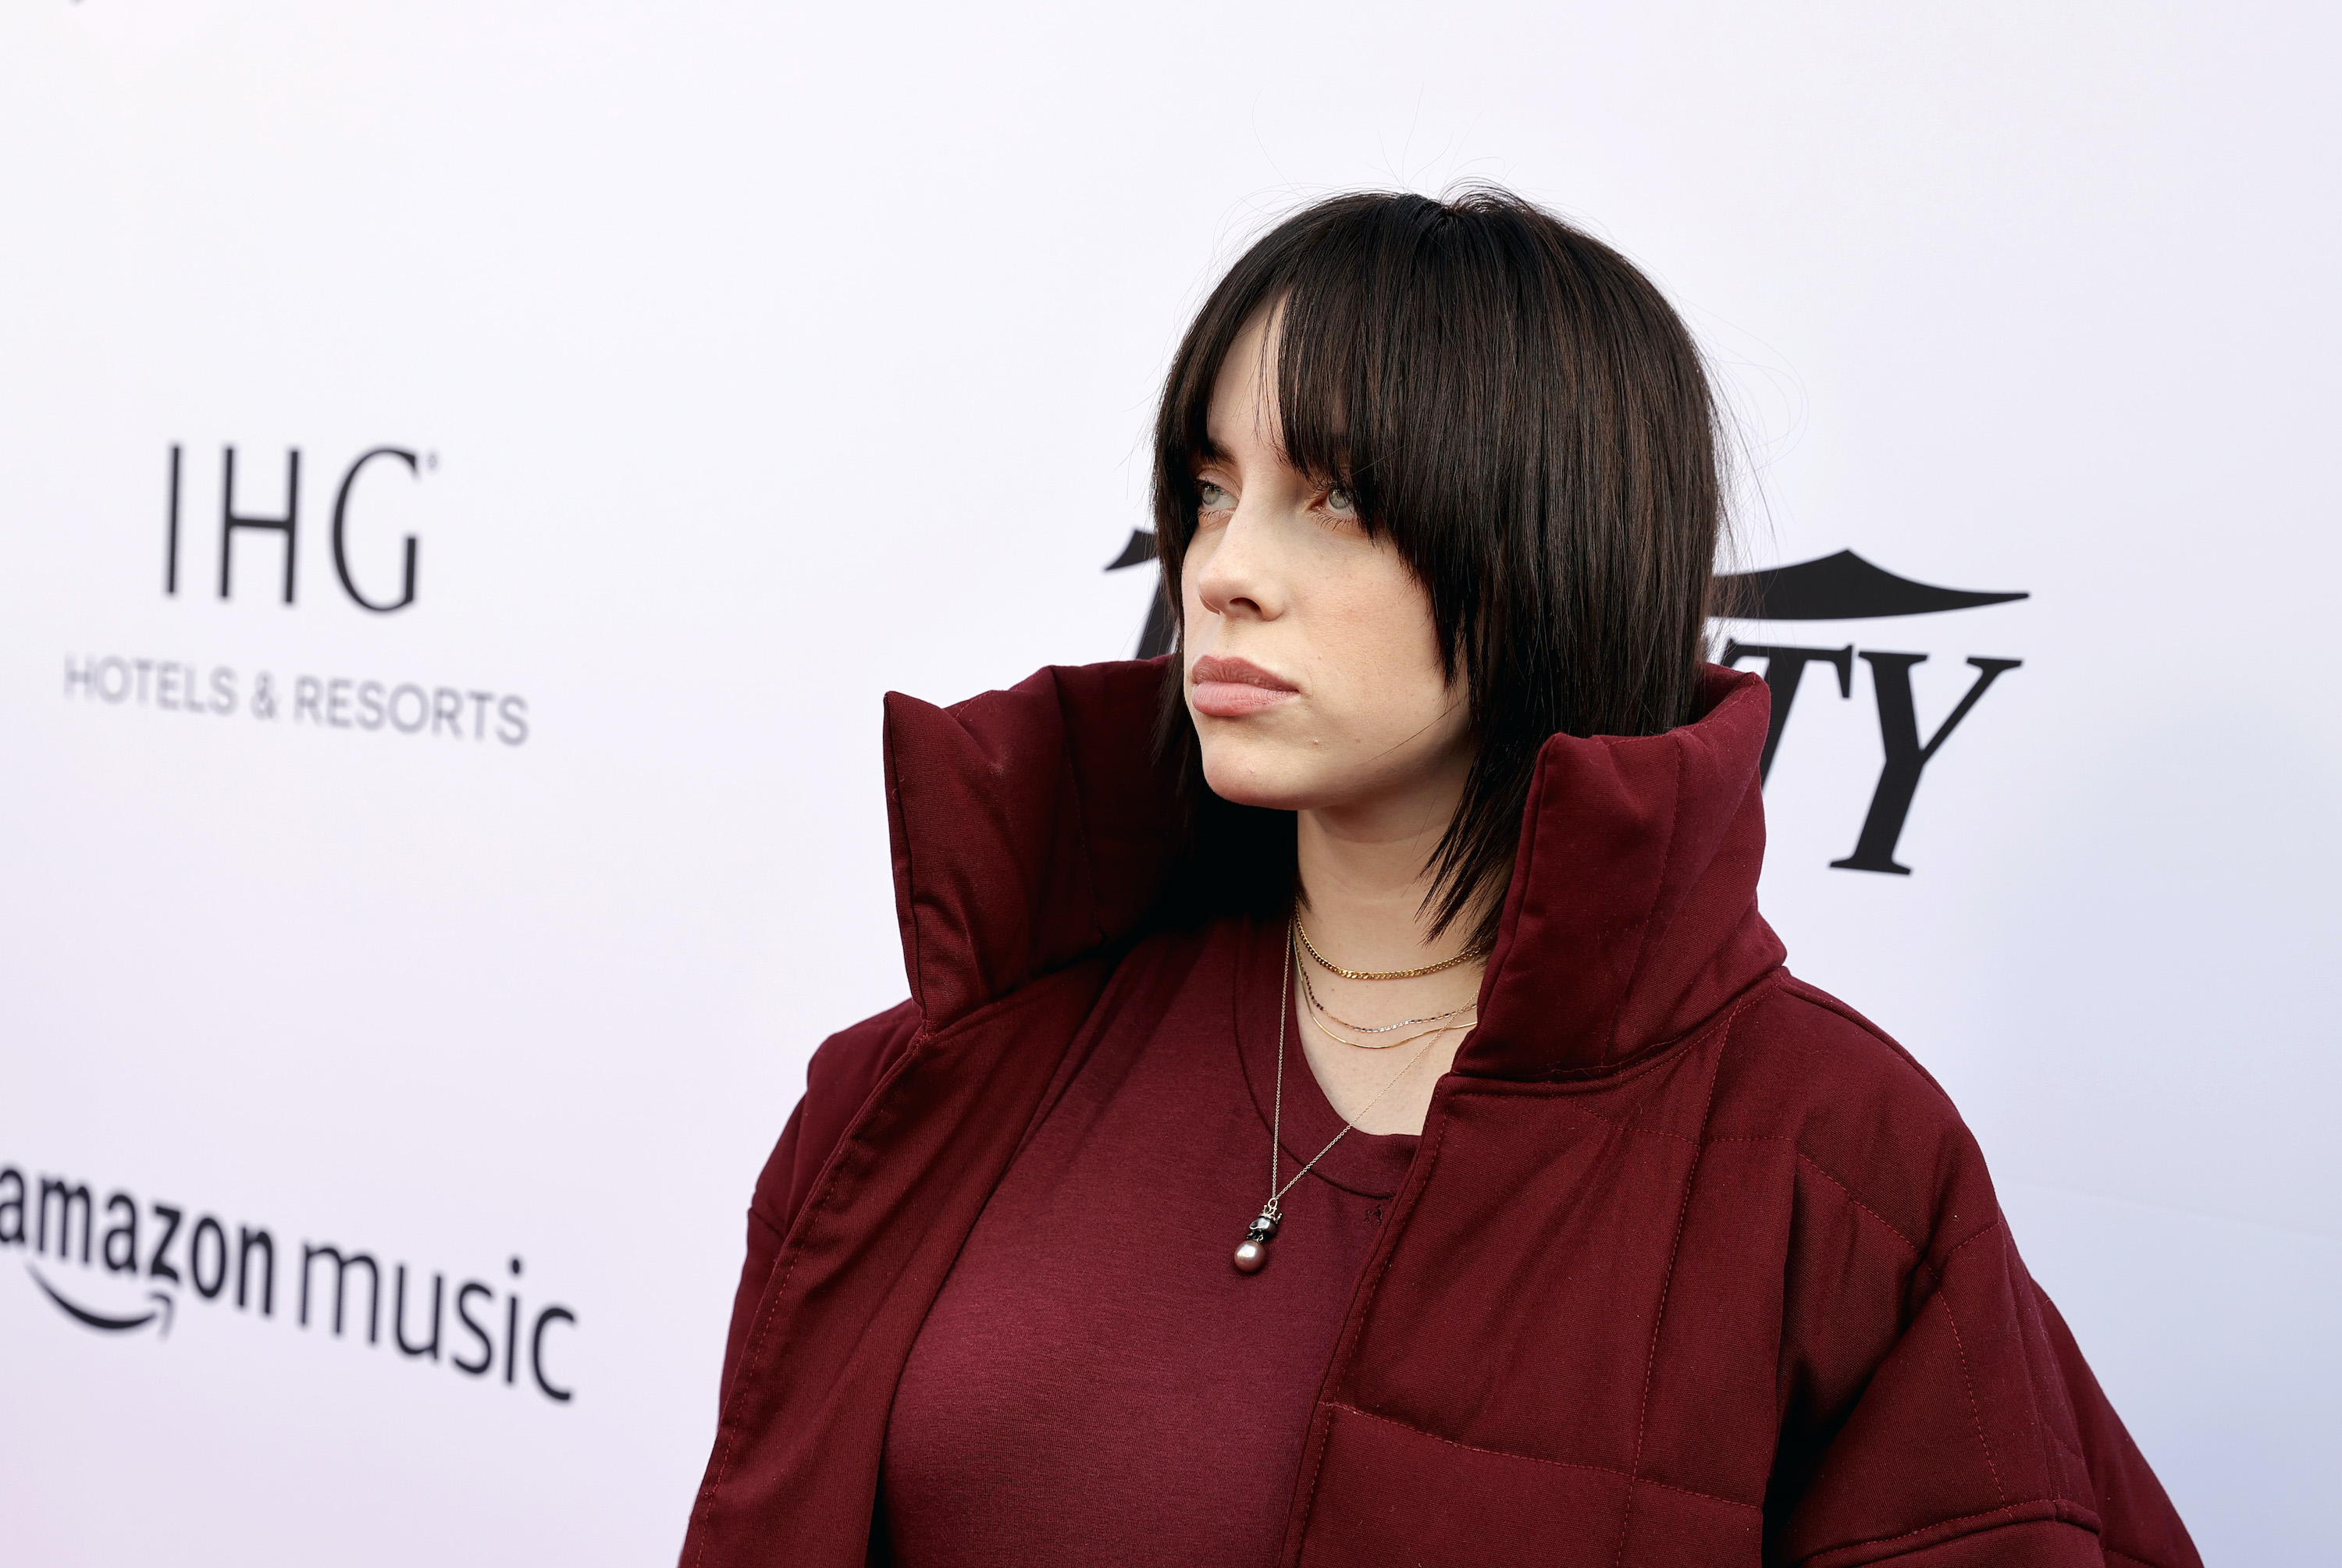 Billie Eilish is Right About Pornography's Harms | Opinion